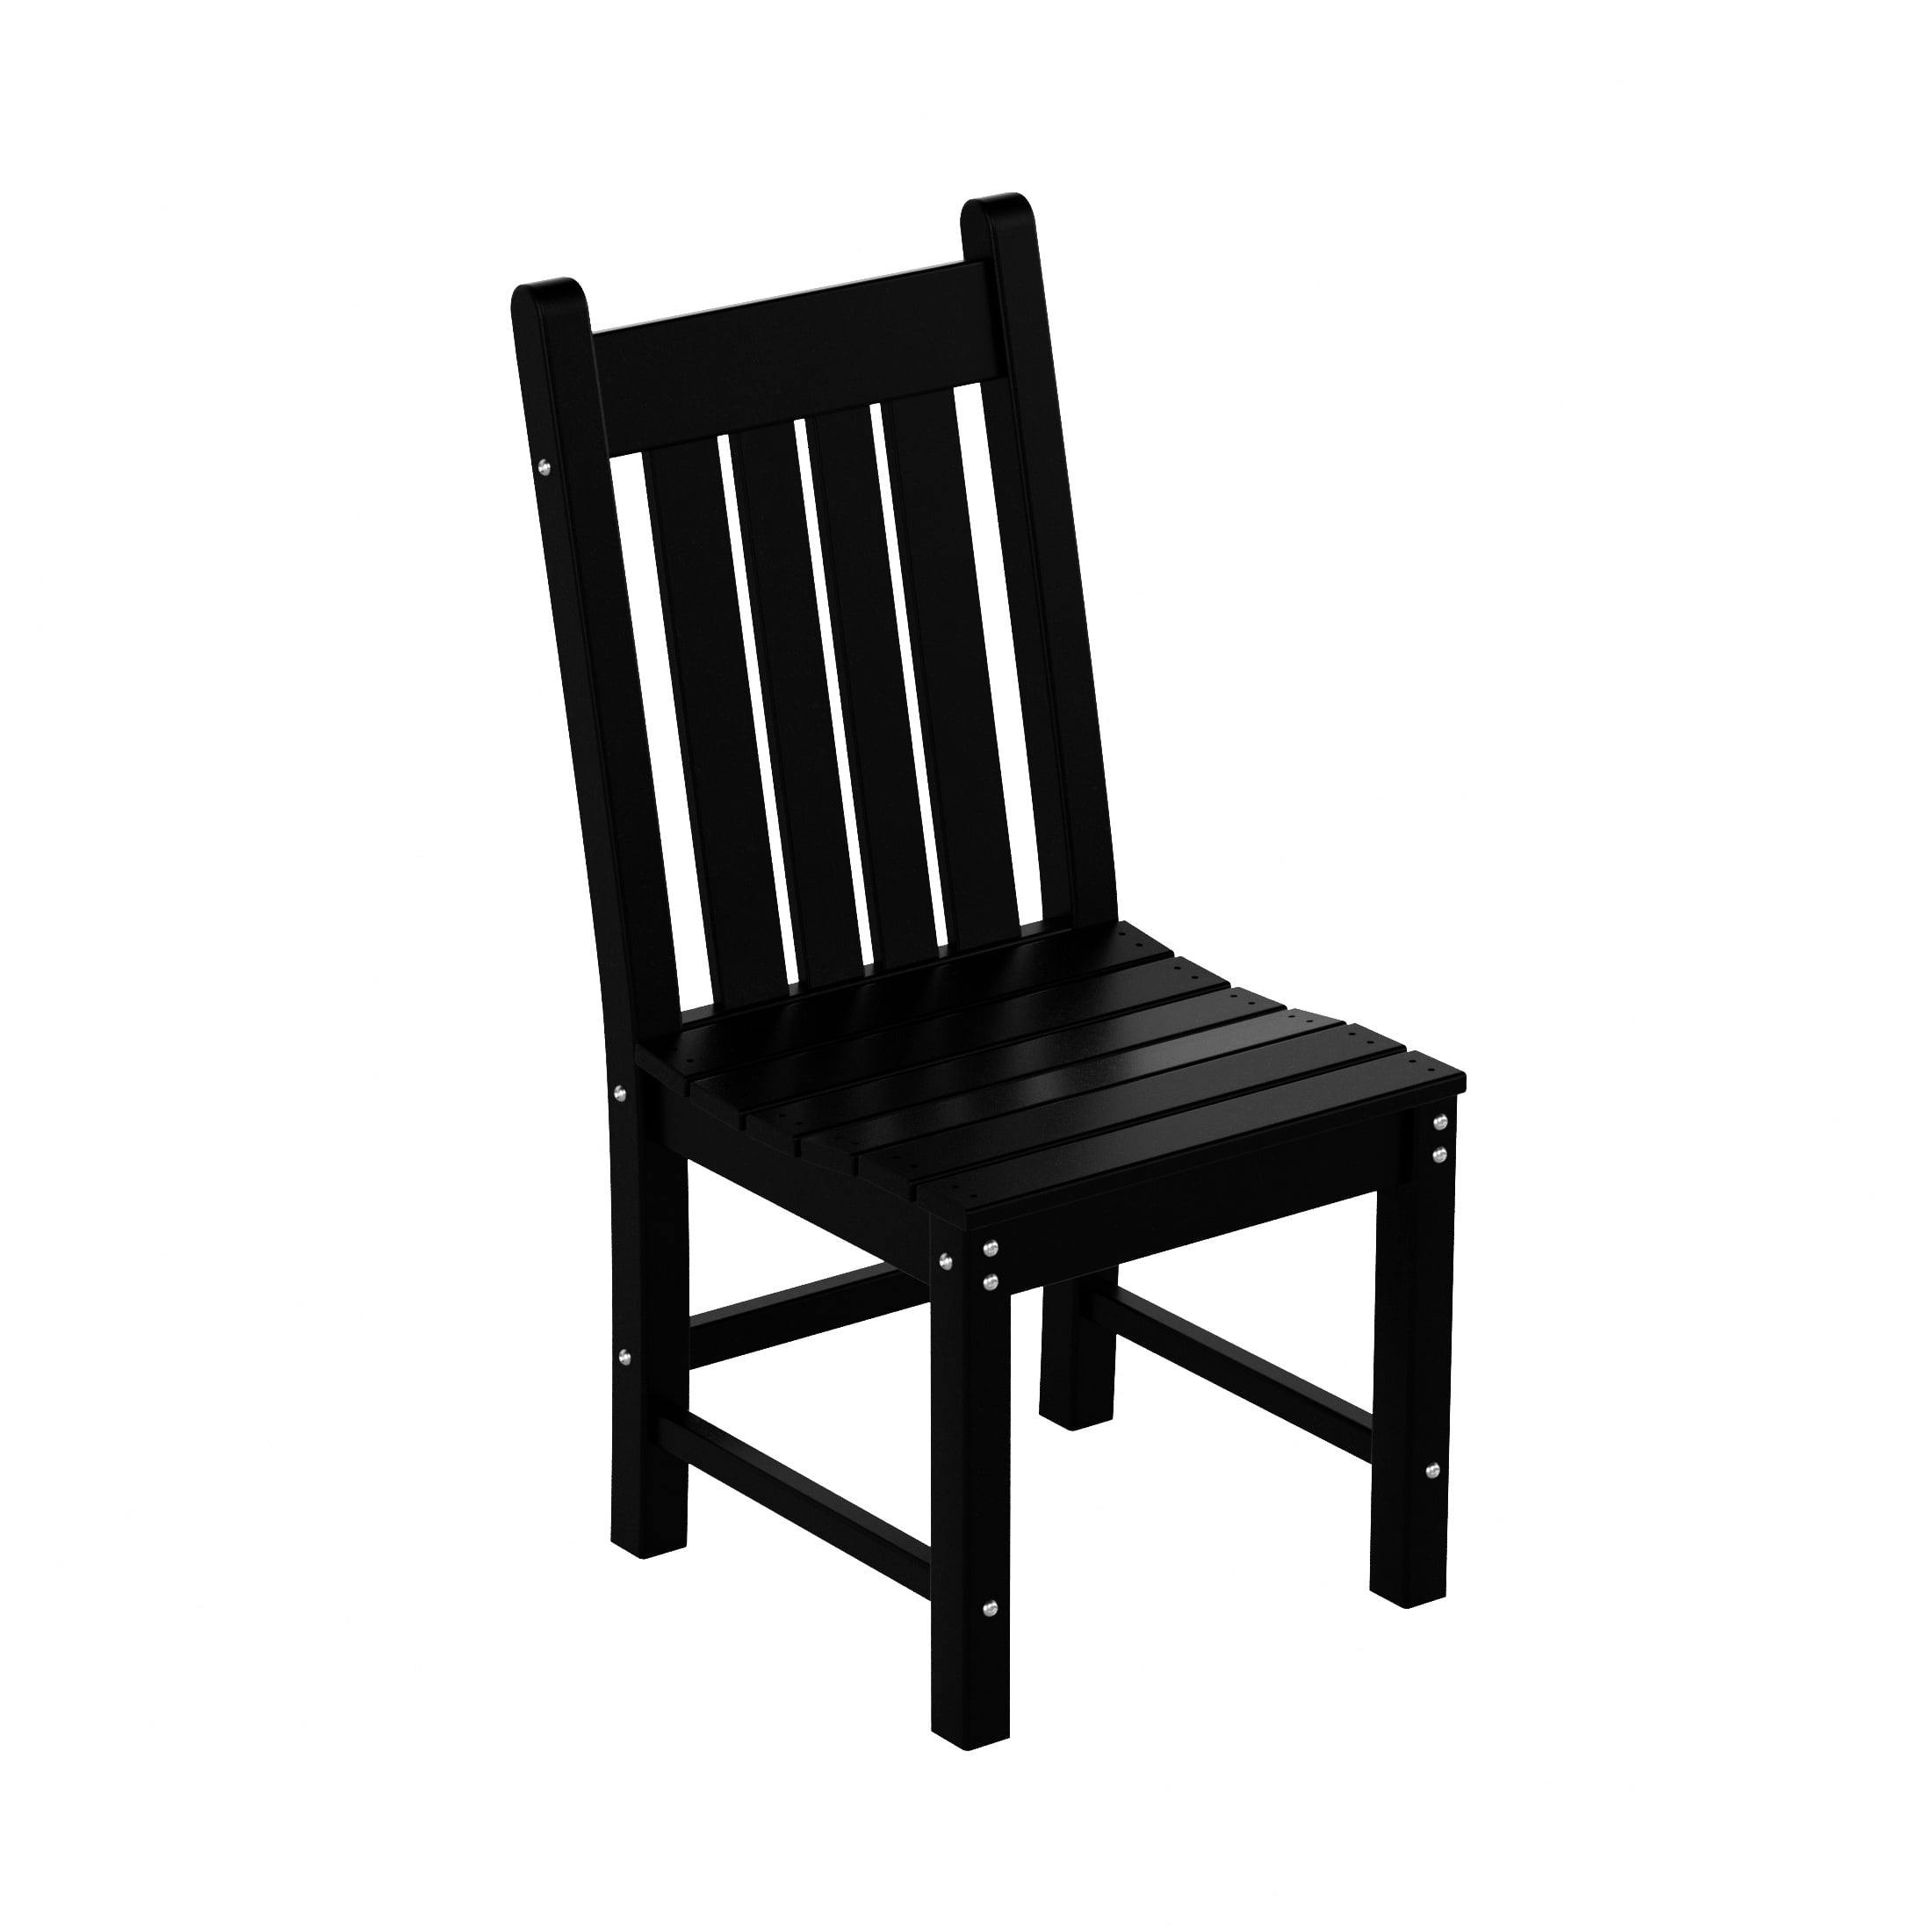 Laguna Classic Black All-Weather Patio Dining Chair